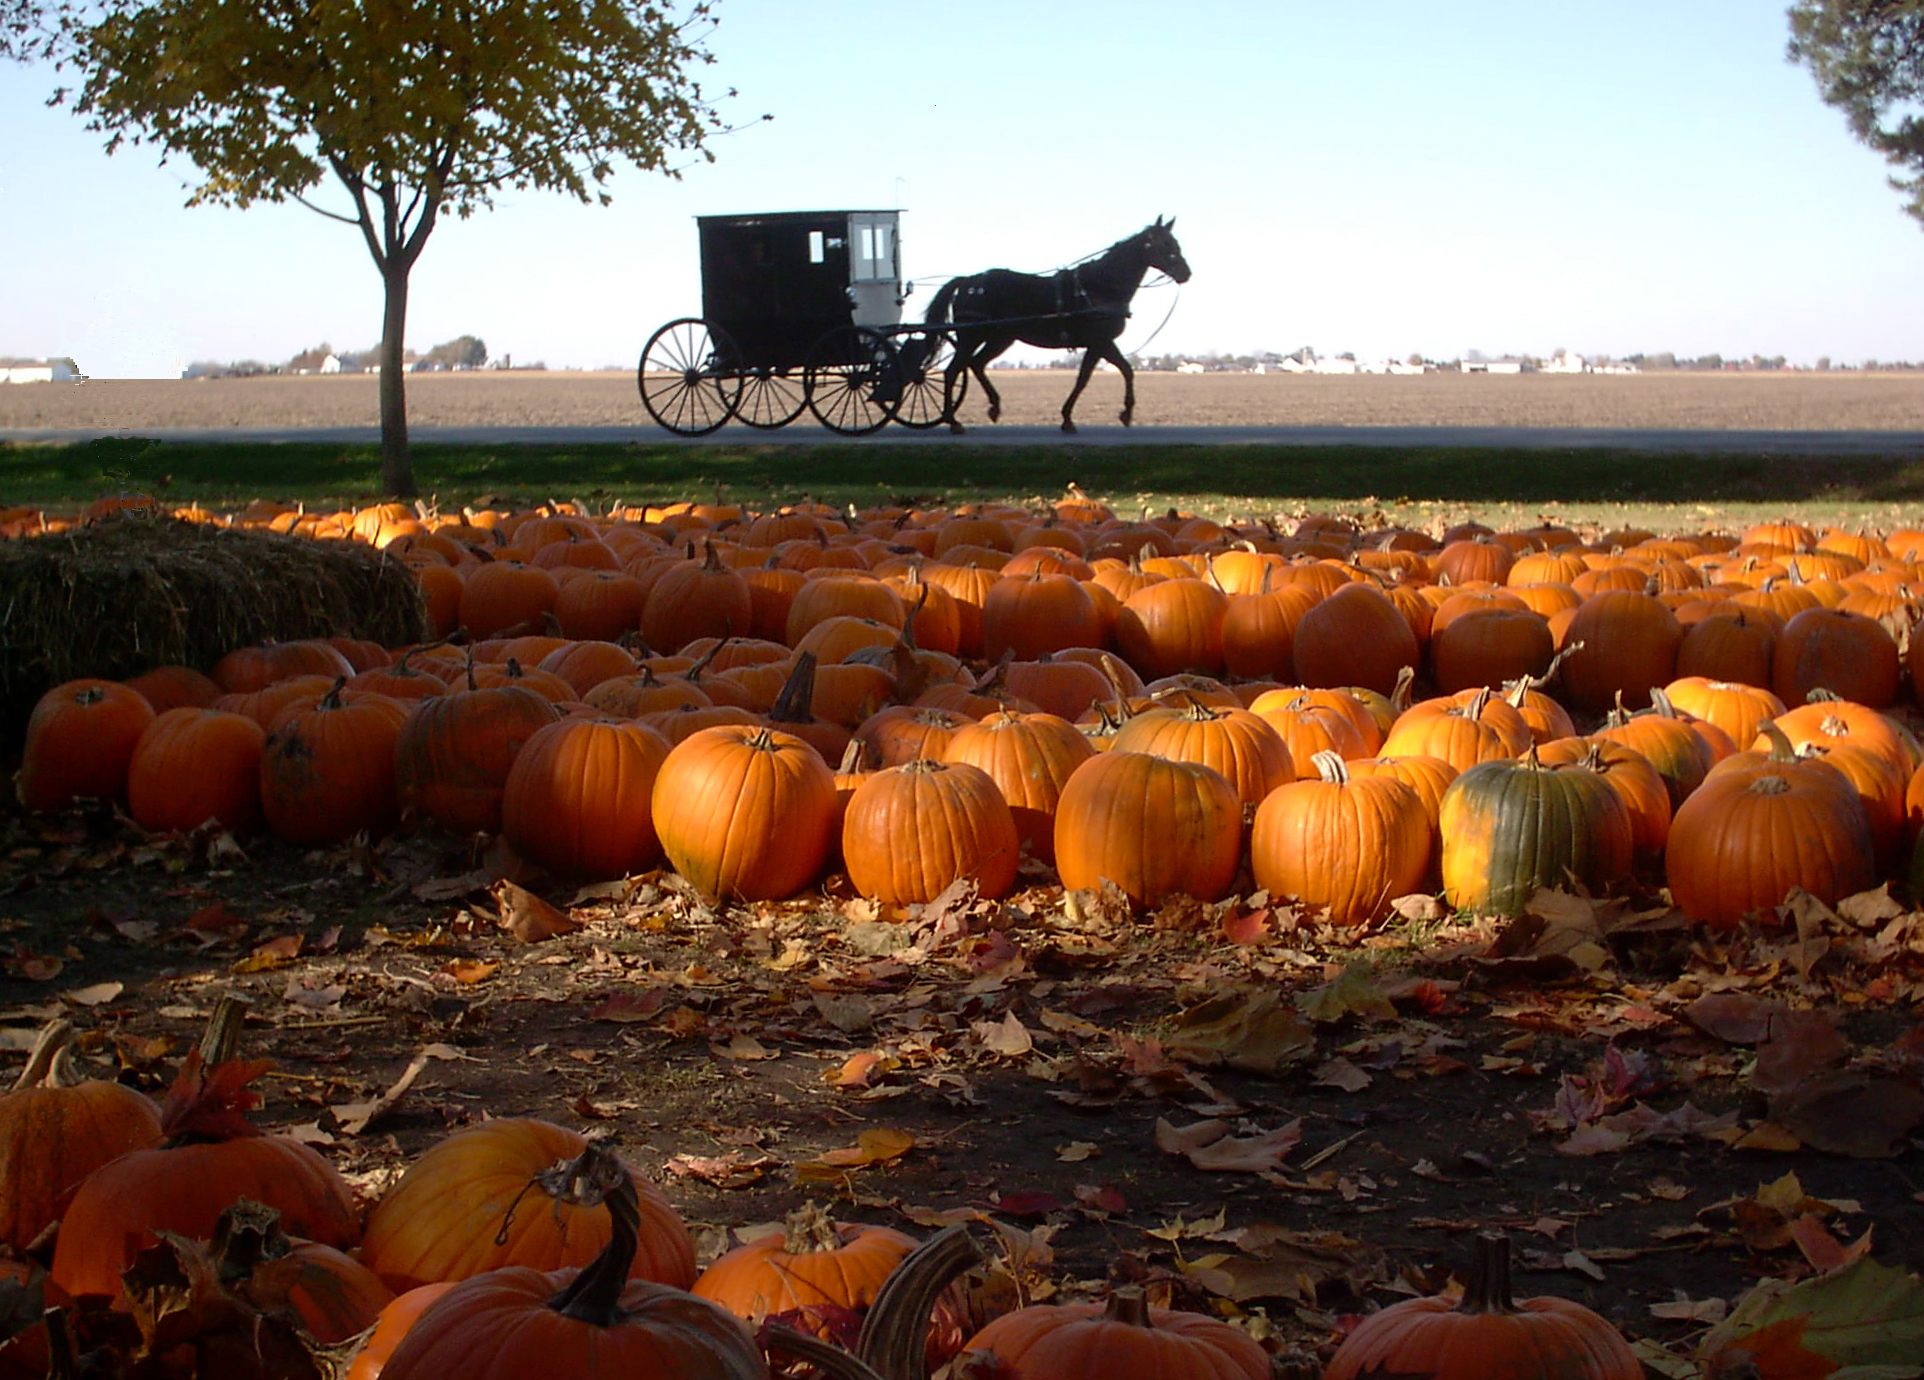 horse and buggy in front of a pumpkin patch